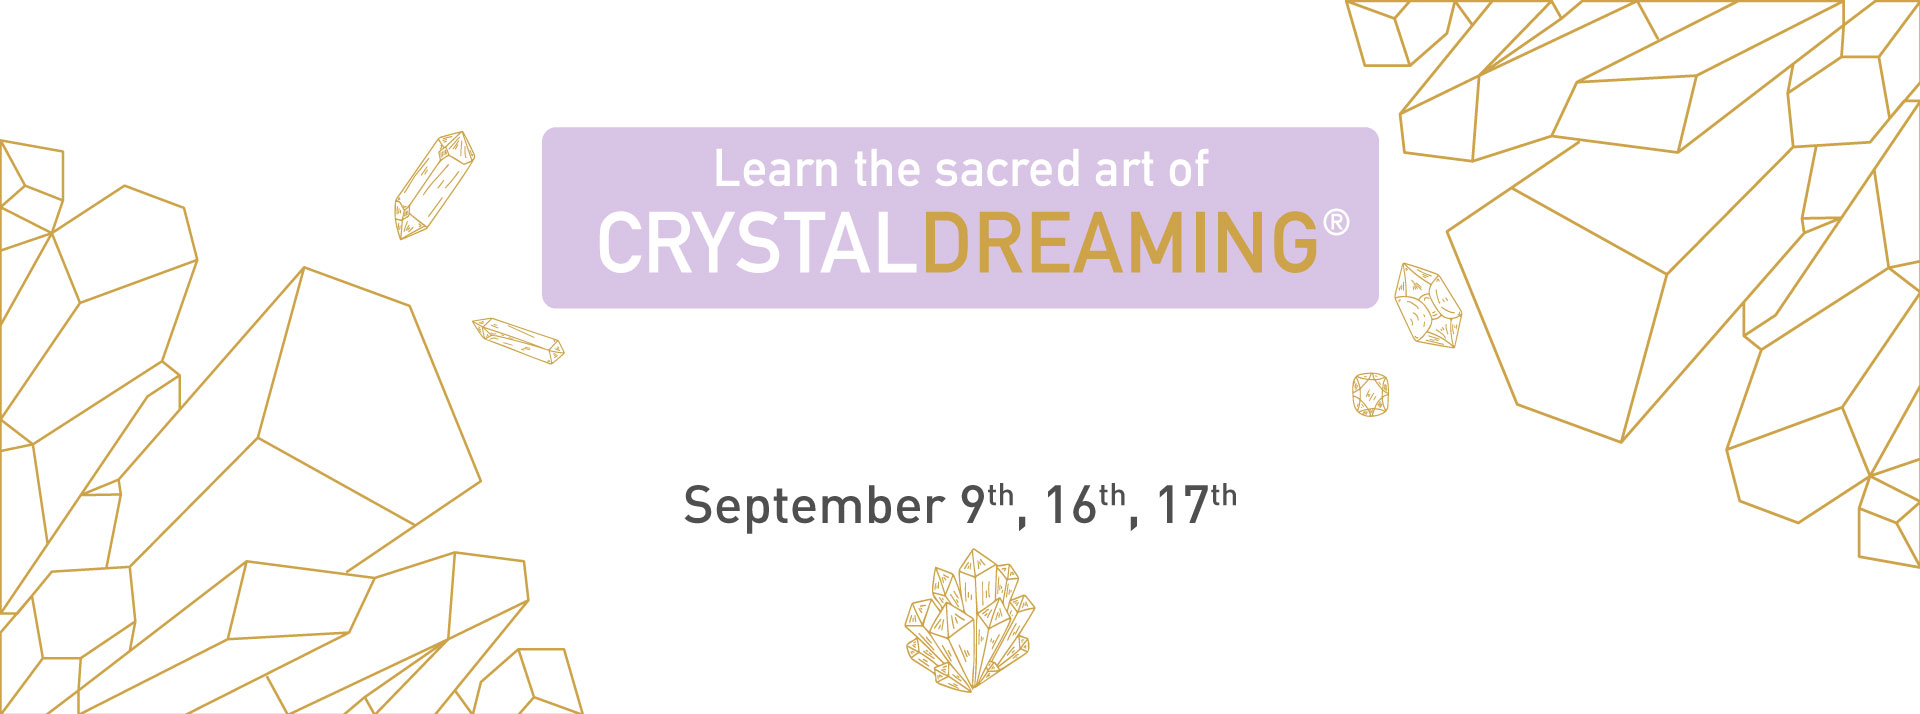 Crystal Dreaming Practitioner Training